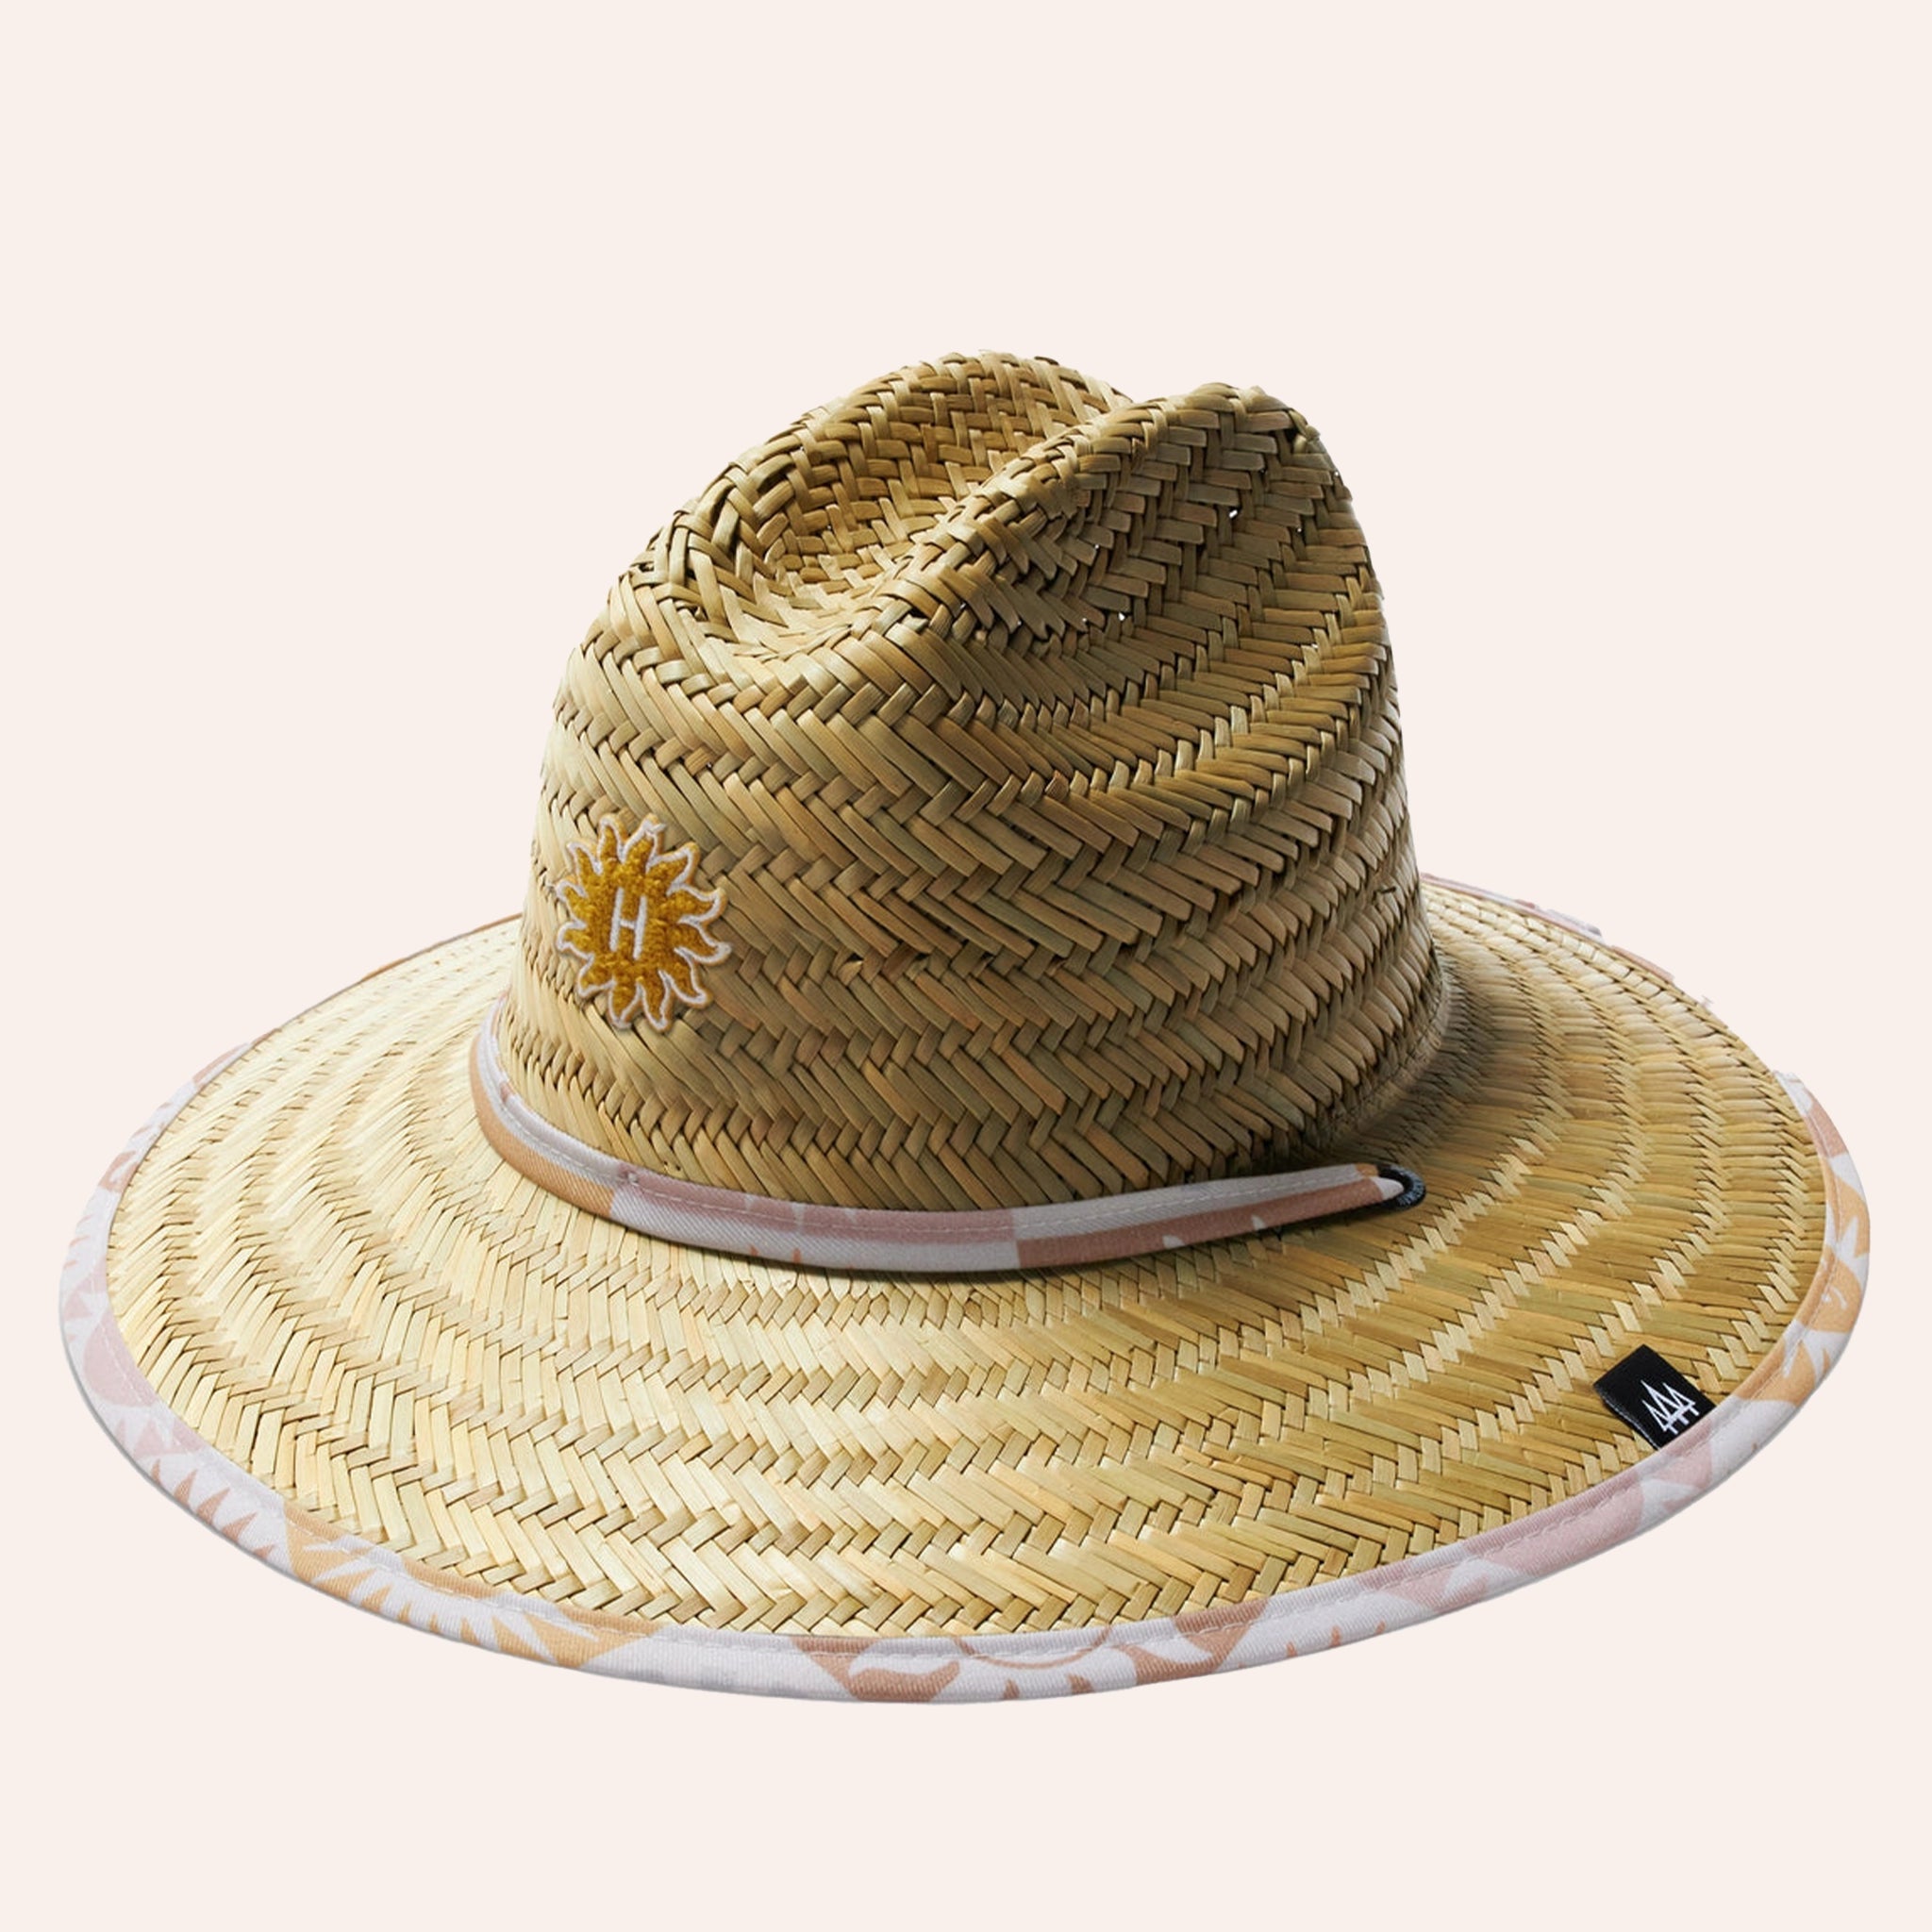 On a white background is a straw hat with a sun design on the underside of the brim. 